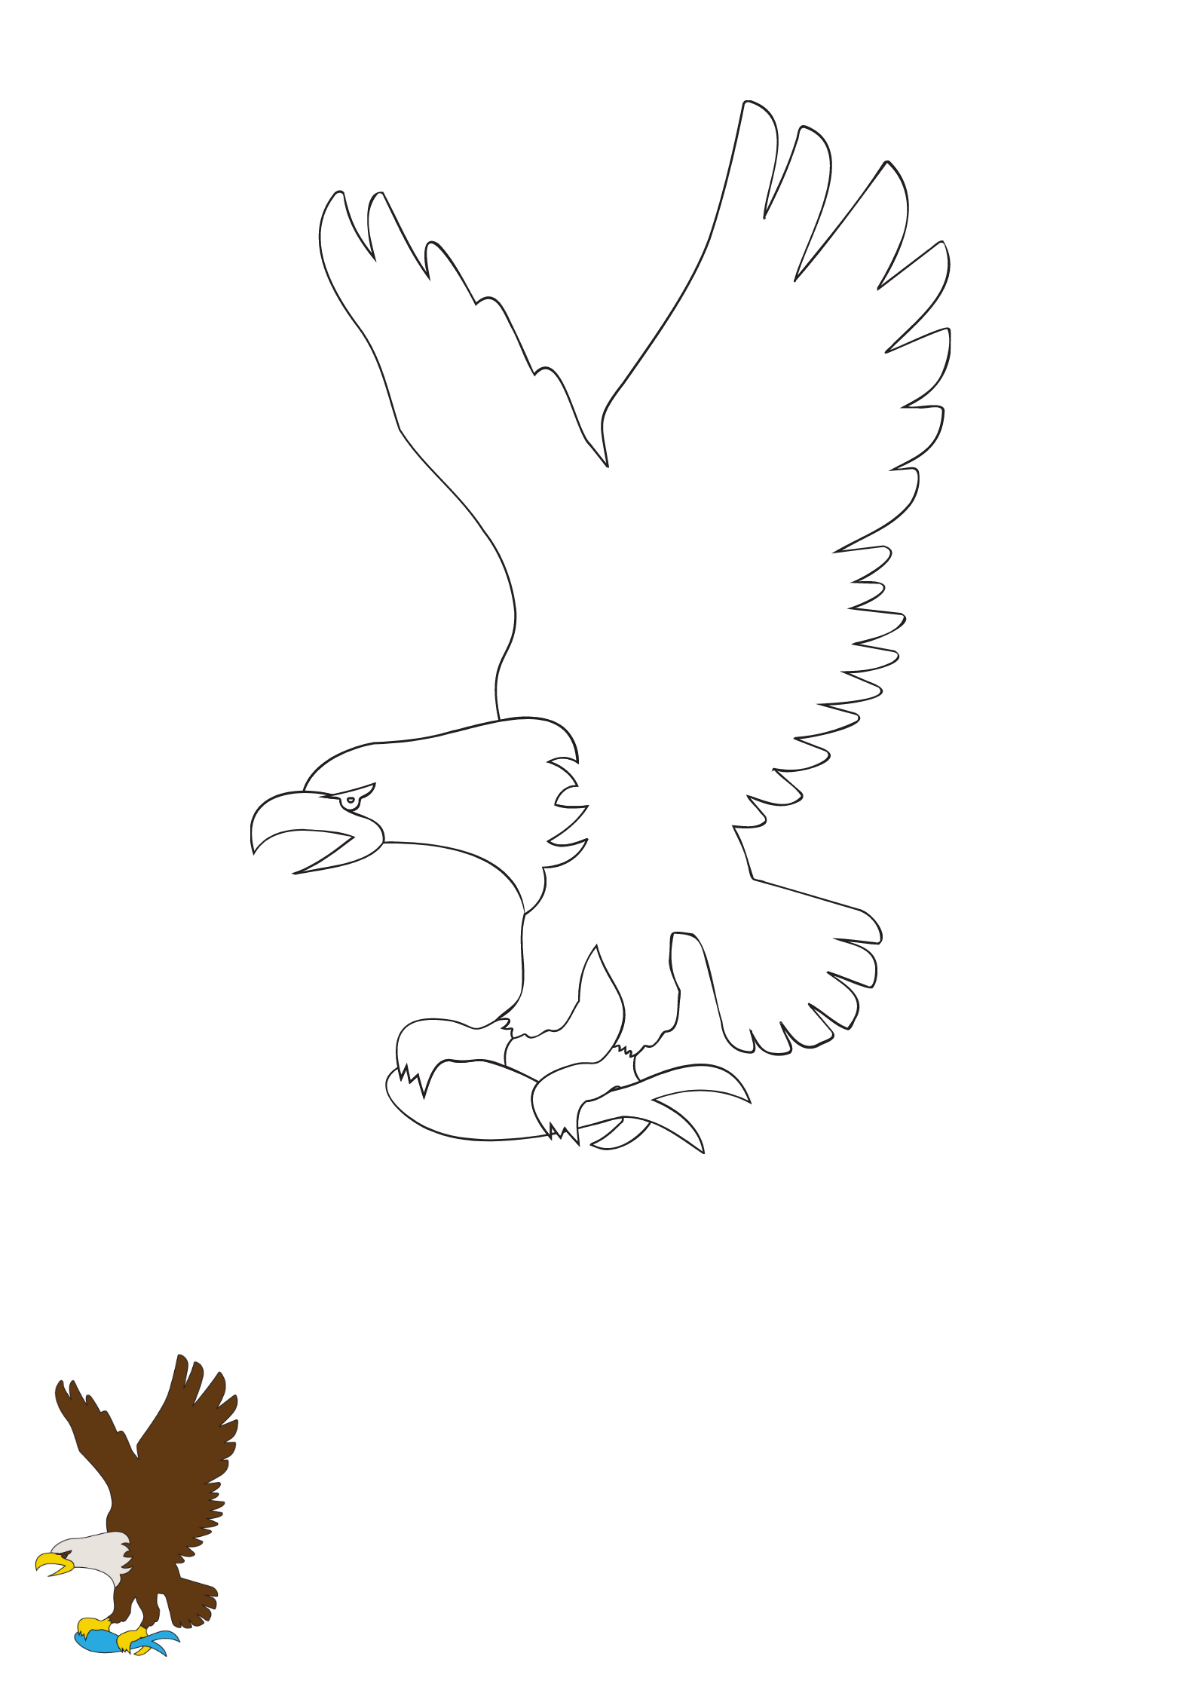 Eating Eagle coloring page